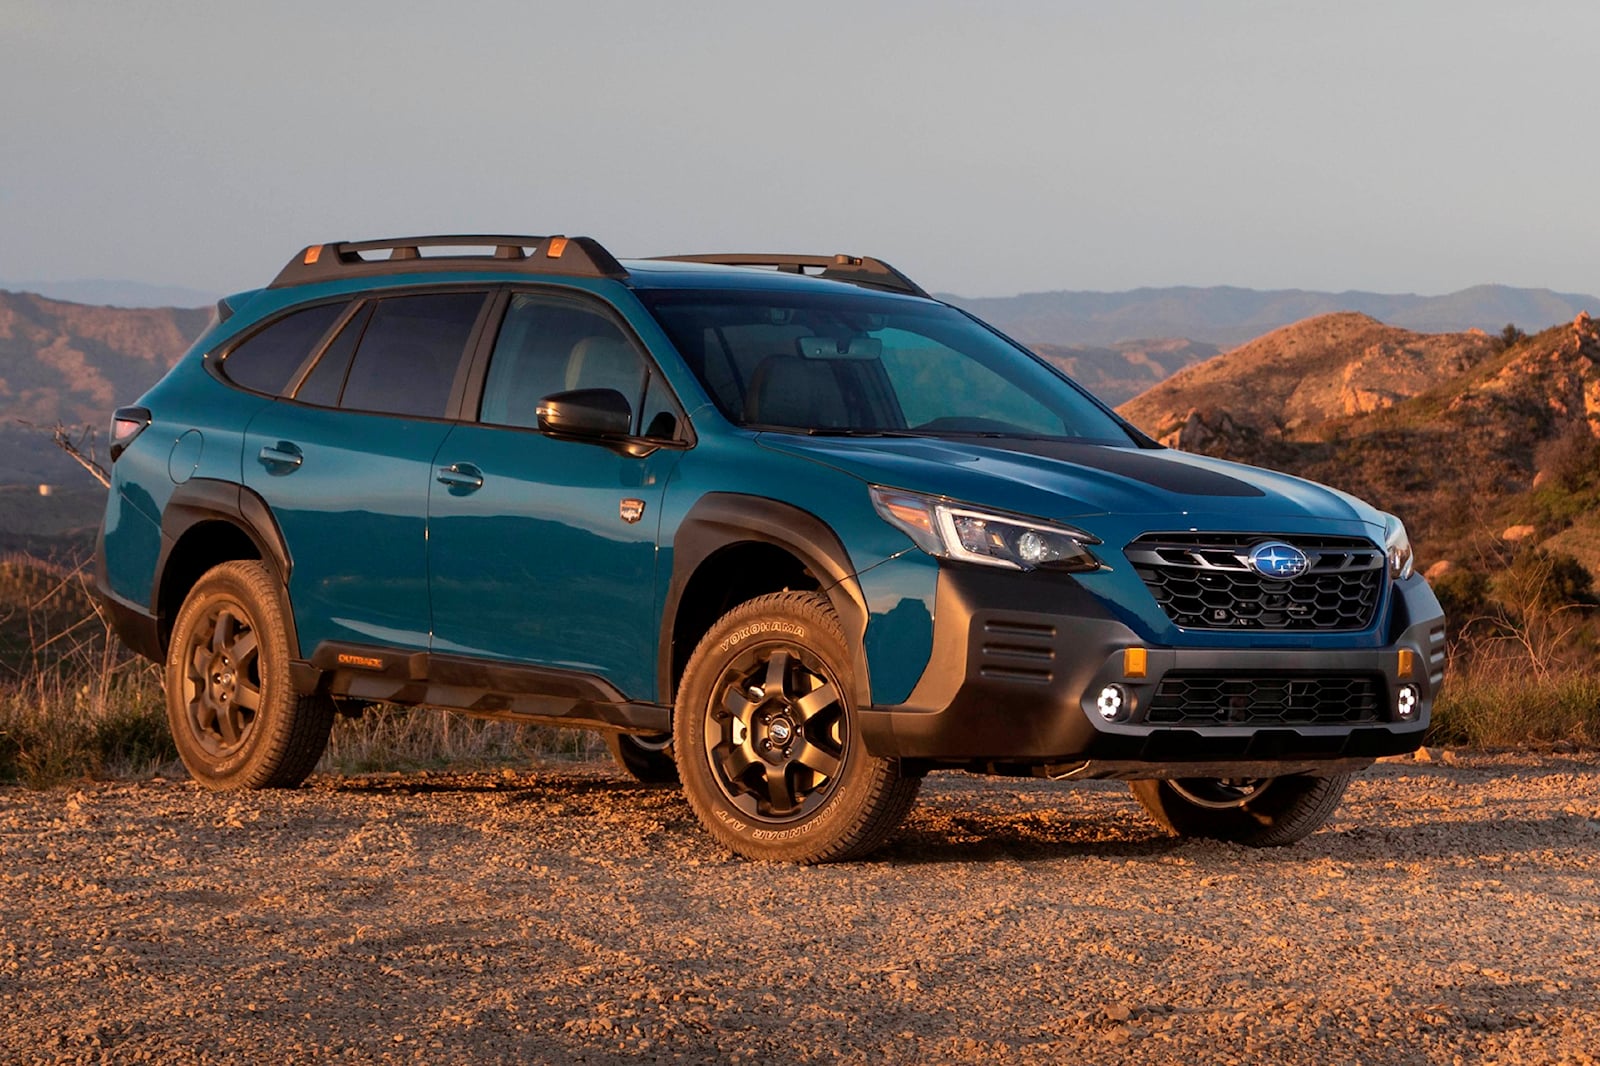 Subaru Continues To Dominate The Safety Rankings